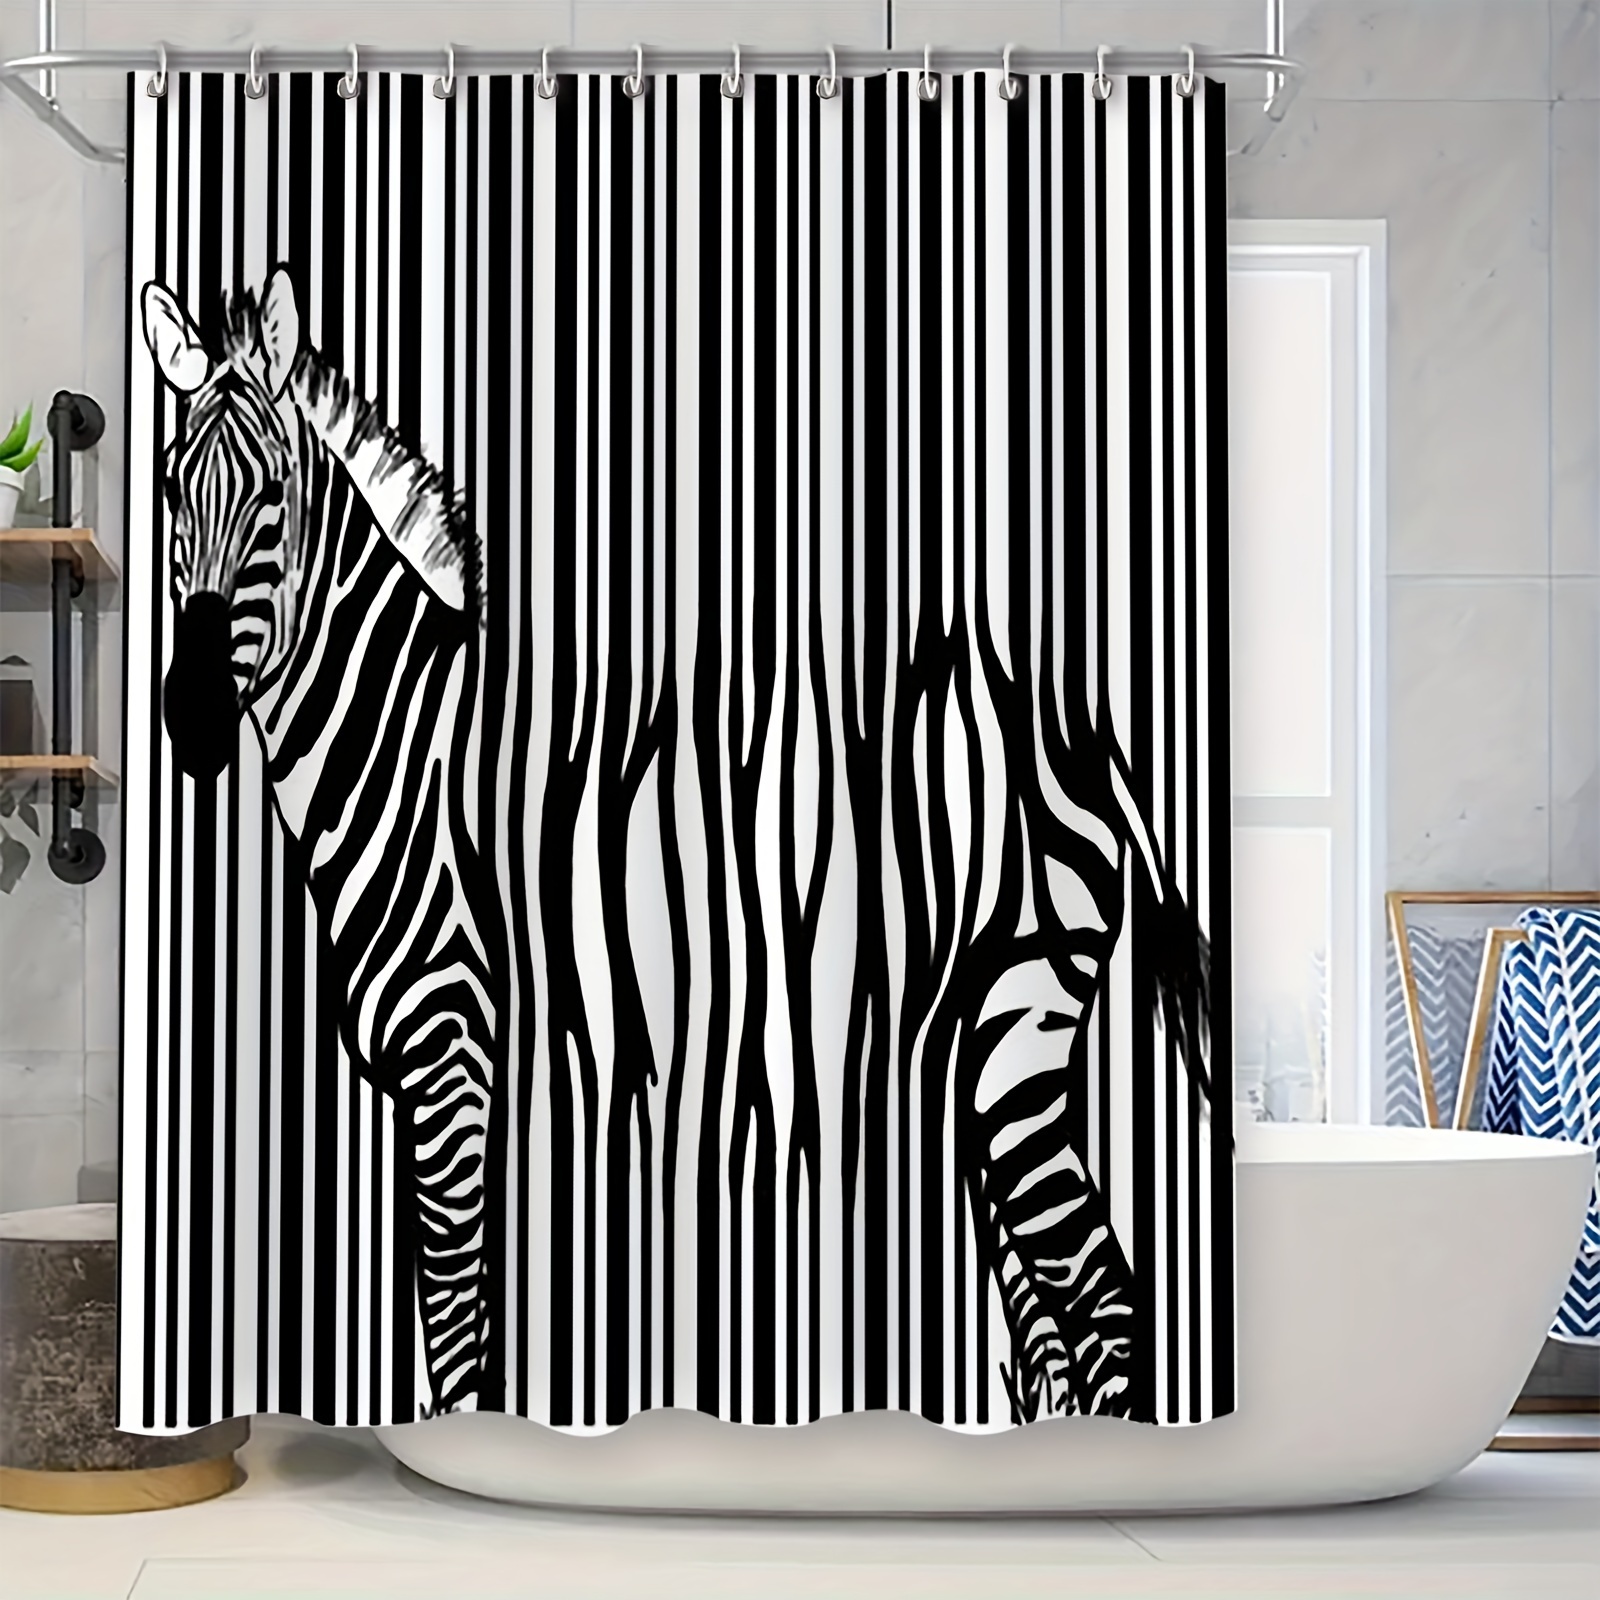 

Zebra Stripe Barcode Design Shower Curtain Set - 70.8"x70.8" Fashion Bathroom Divider, Water-resistant Mold Proof Polyester Bath Curtain With 12 Eyelet Rings, Unlined Woven Home Decor For All Seasons